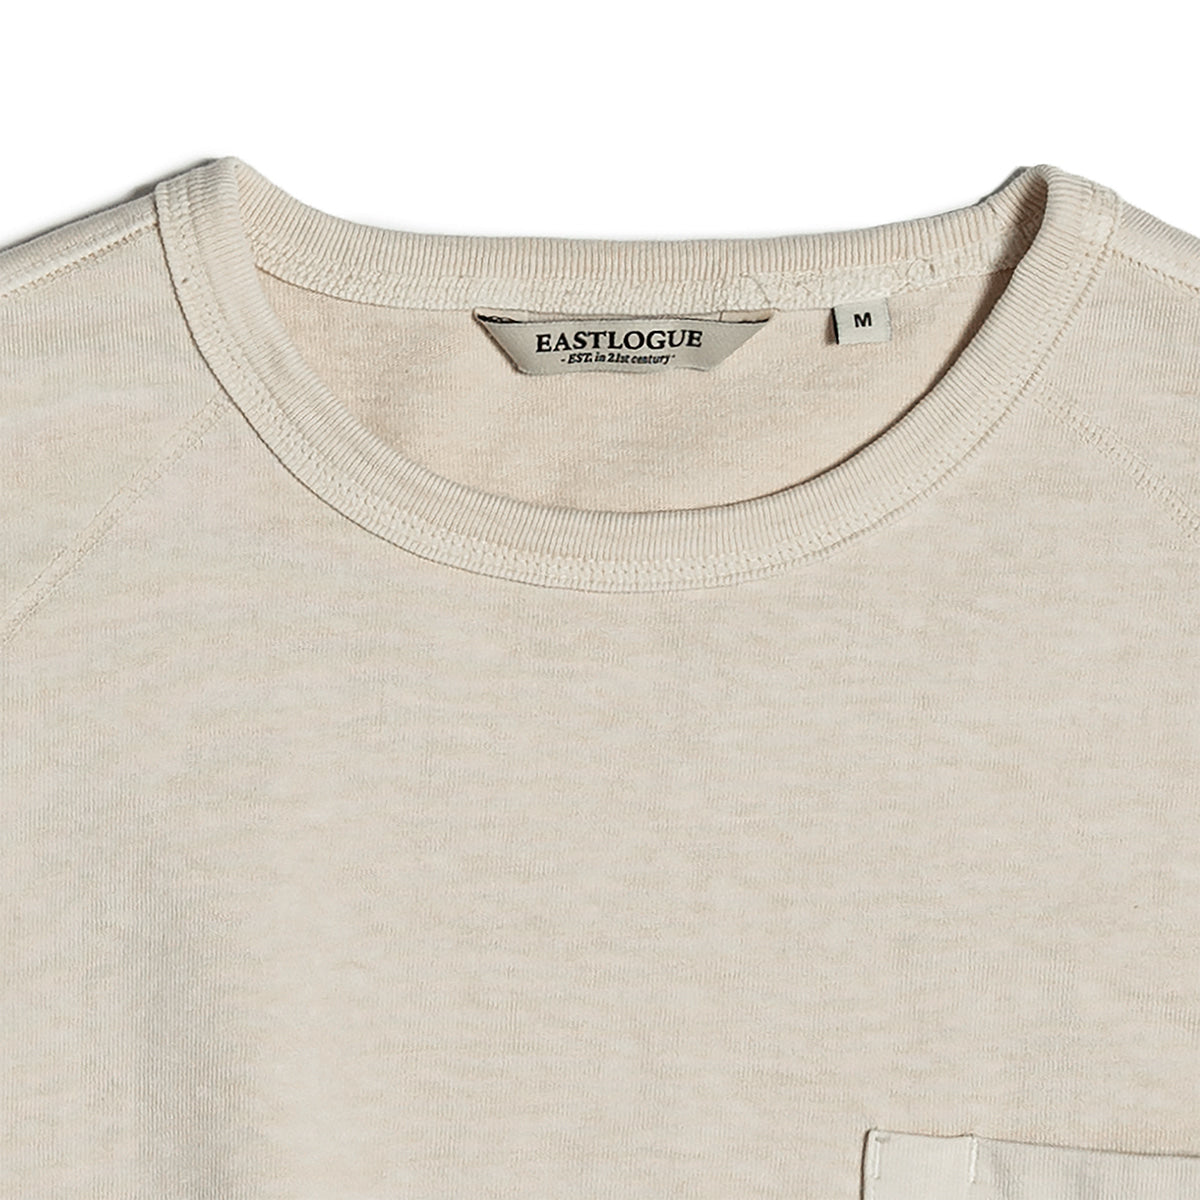 EASTLOGUE 2021SSCS05 COVER STITCH T-SHIRT - CREAM